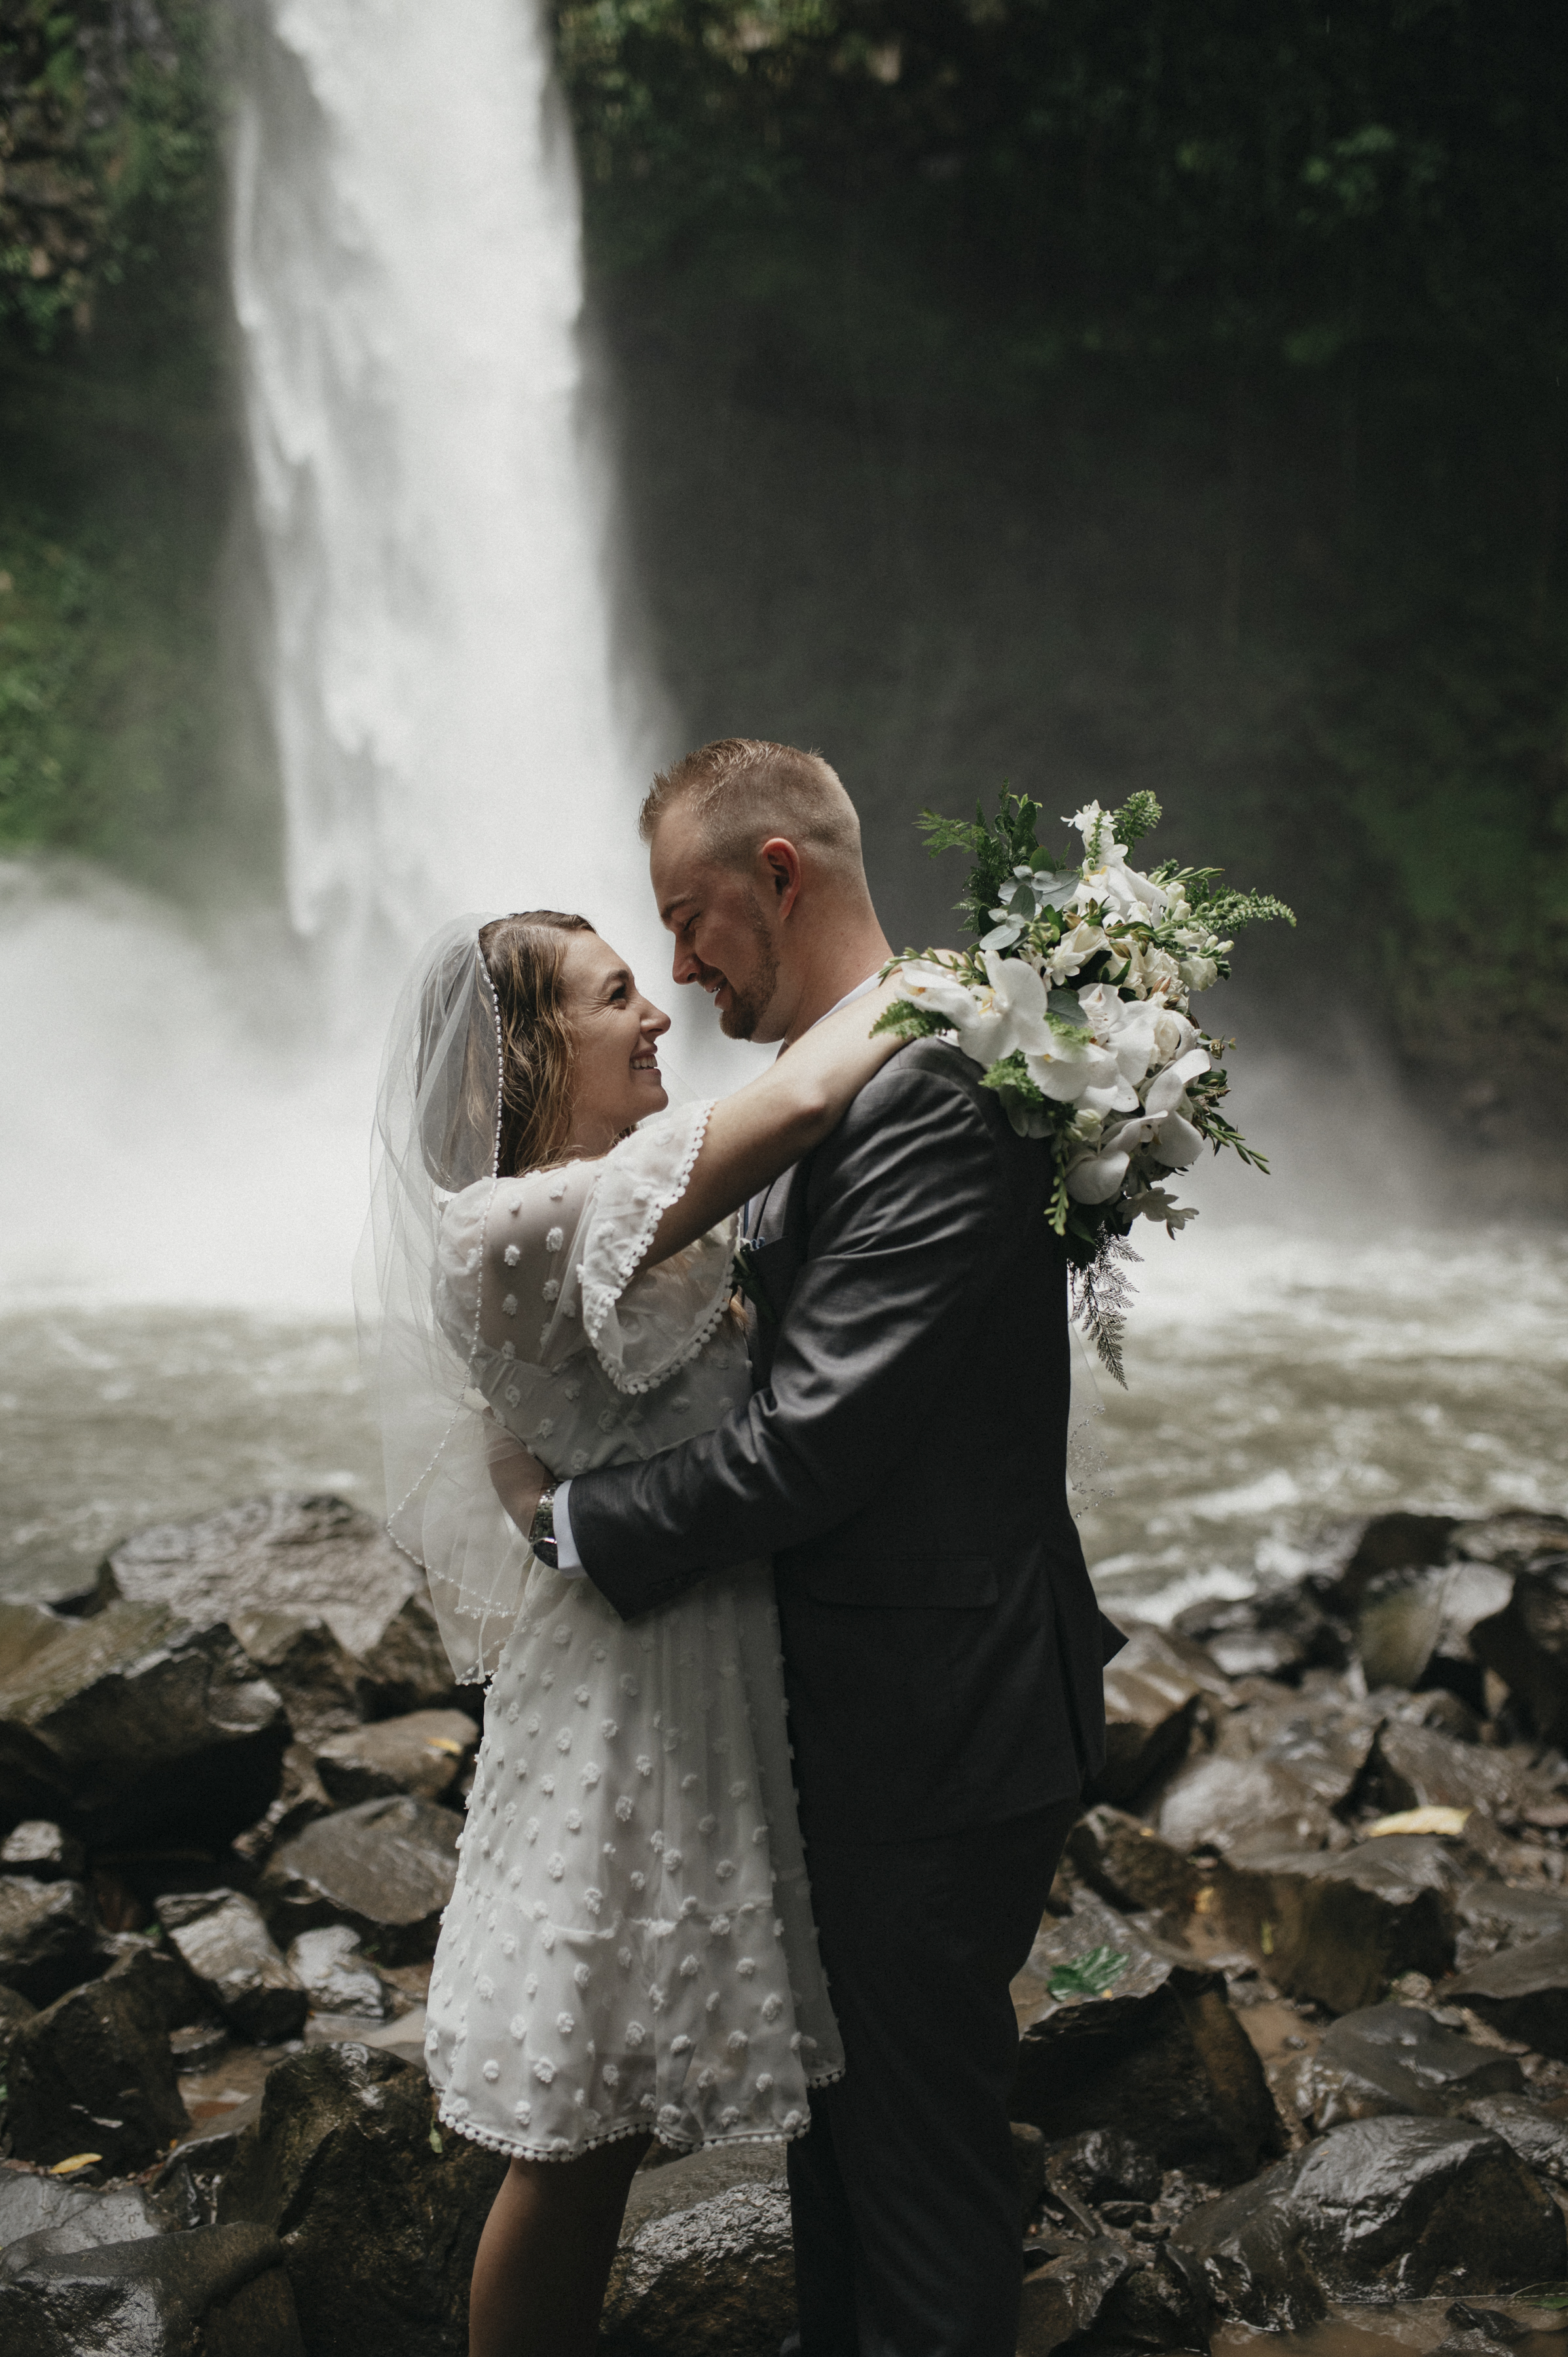 Kissing by a Waterfall